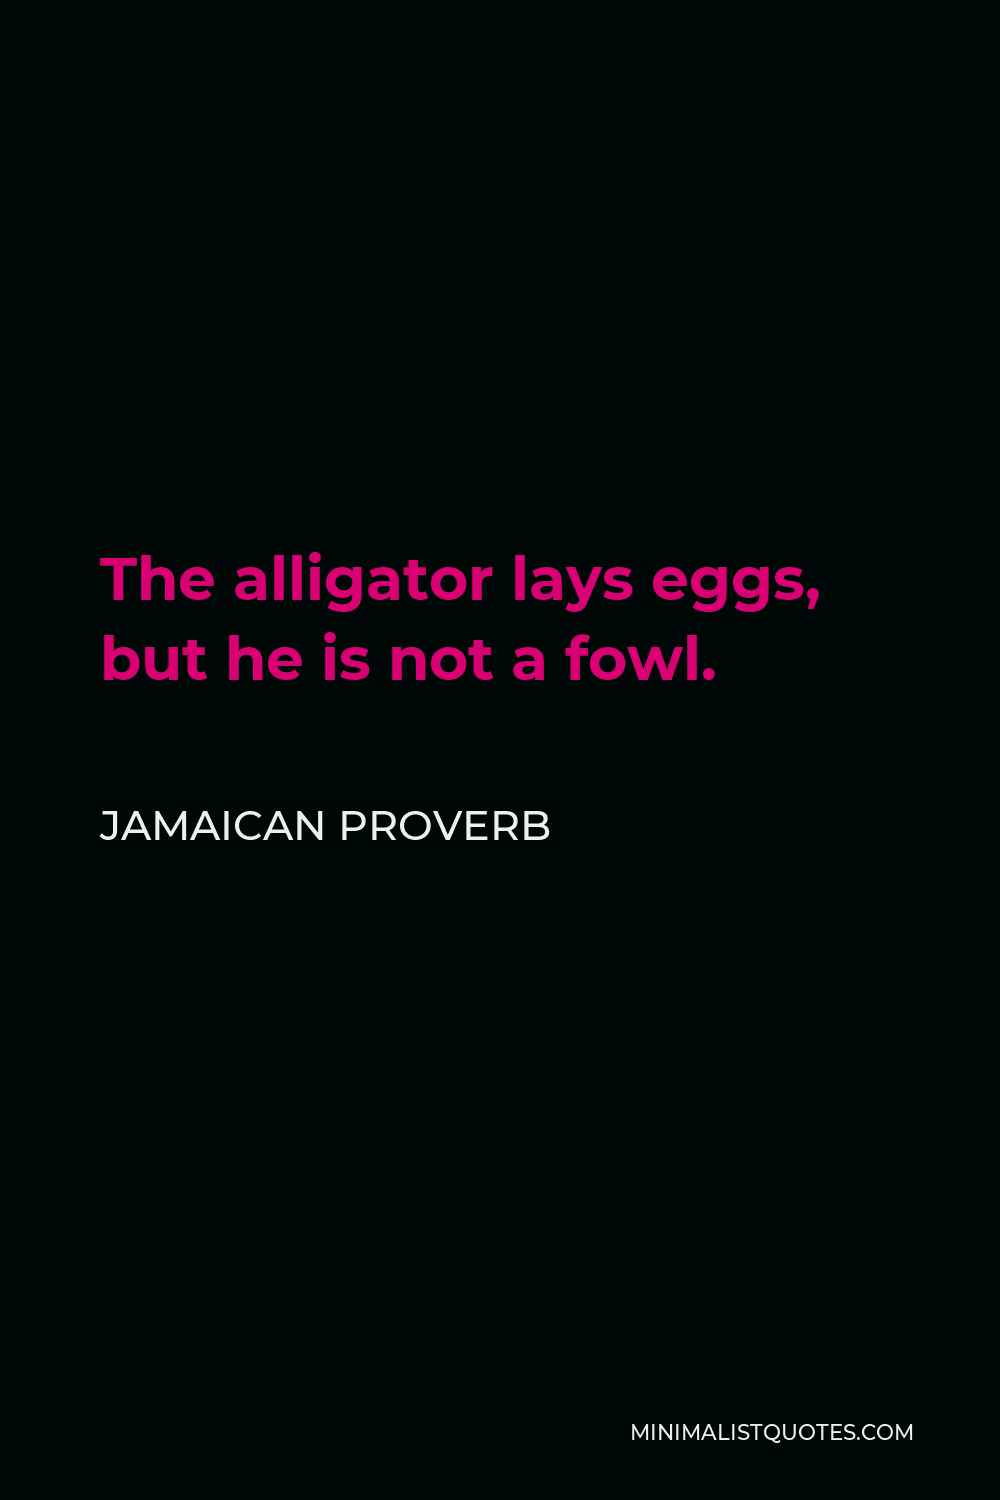 Jamaican Proverb Quote - The alligator lays eggs, but he is not a fowl.